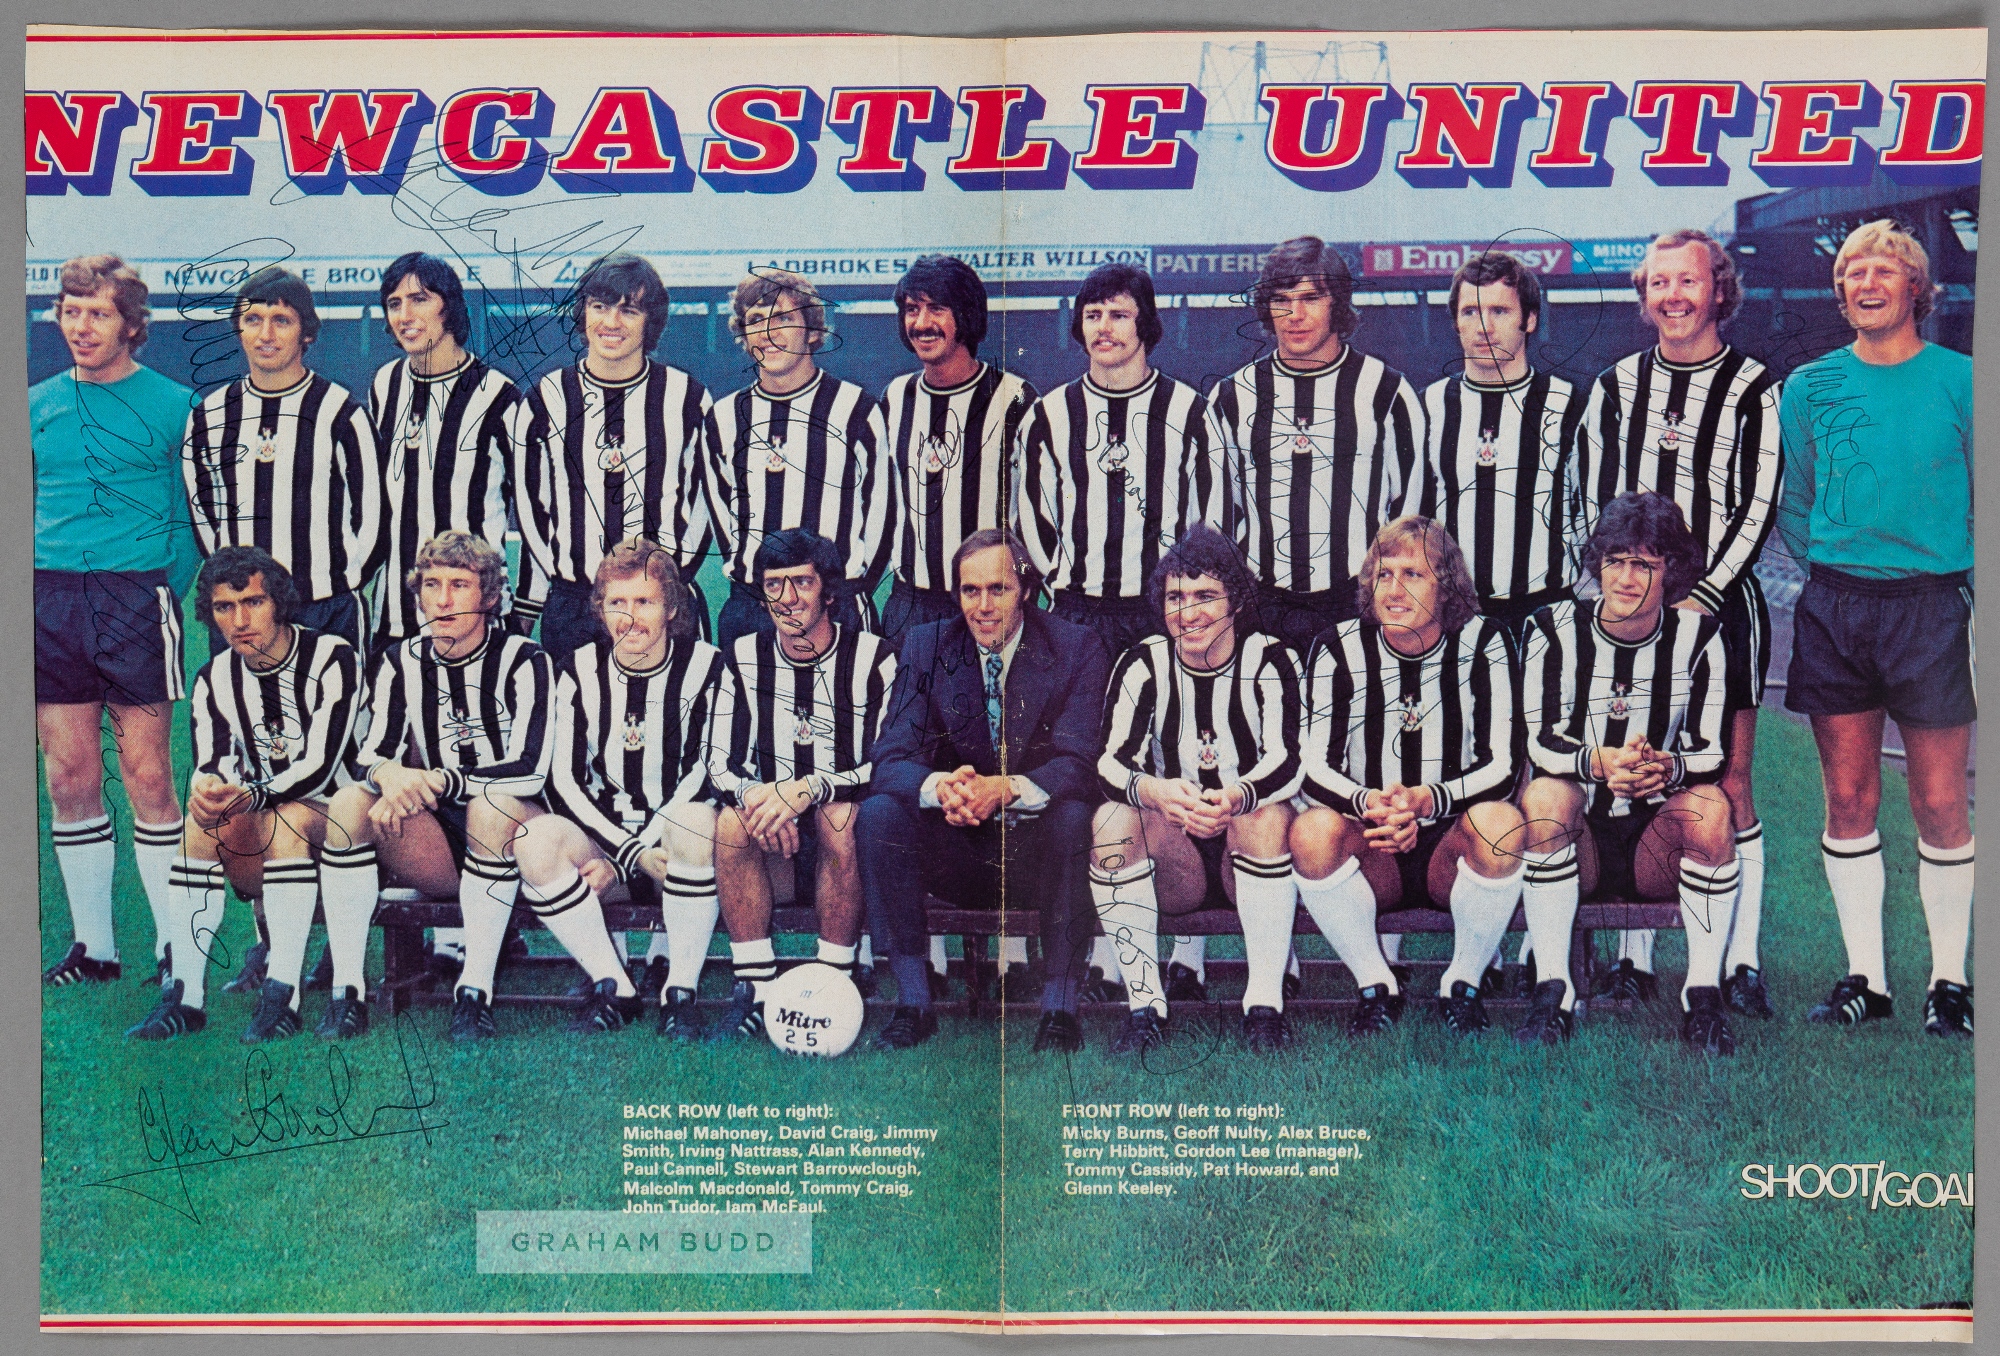 Newcastle United 1975-76 autographed large colour double page team photograph pre-season from